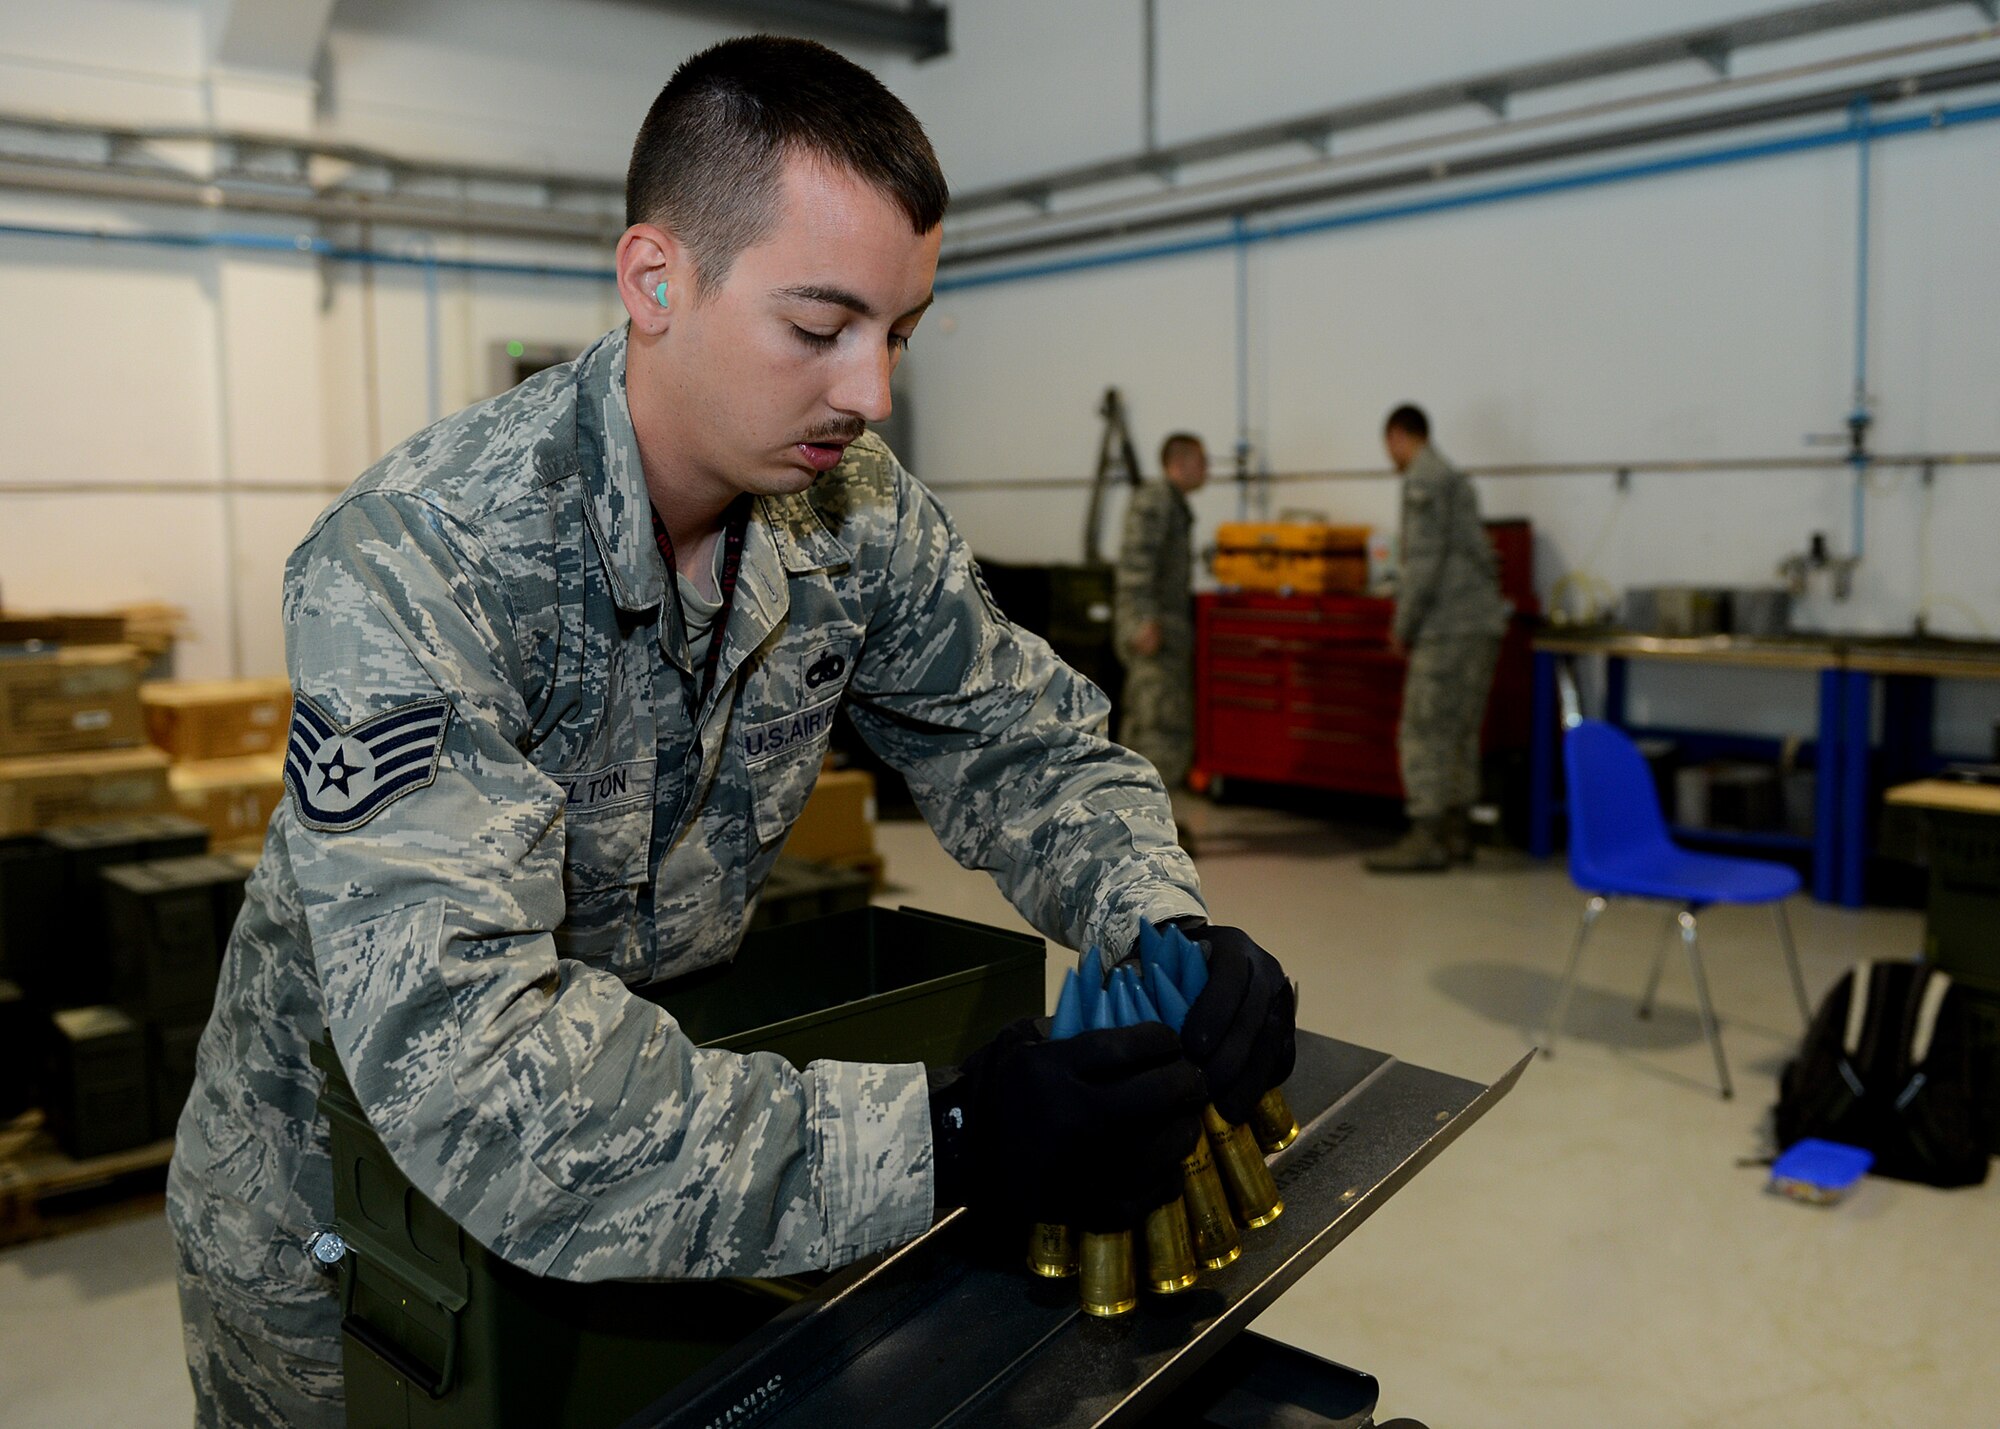 U.S. Air Force Staff Sgt. Jonathan Shelton, 52nd Equipment Maintenance Squadron munitions storage crew chief from Bassett, Va., places 20 mm target practice rounds on a replenisher table at Lask Air Base, Poland, June 12, 2014. Airmen from the 52nd EMS of Spangdahlem Air Base, Germany, supported exercises BALTOPS 14 and EAGLE TALON, which aimed to familiarize pilots with foreign procedures and strengthen NATO partnerships. (U.S. Air Force photo by Airman 1st Class Kyle Gese/Released)